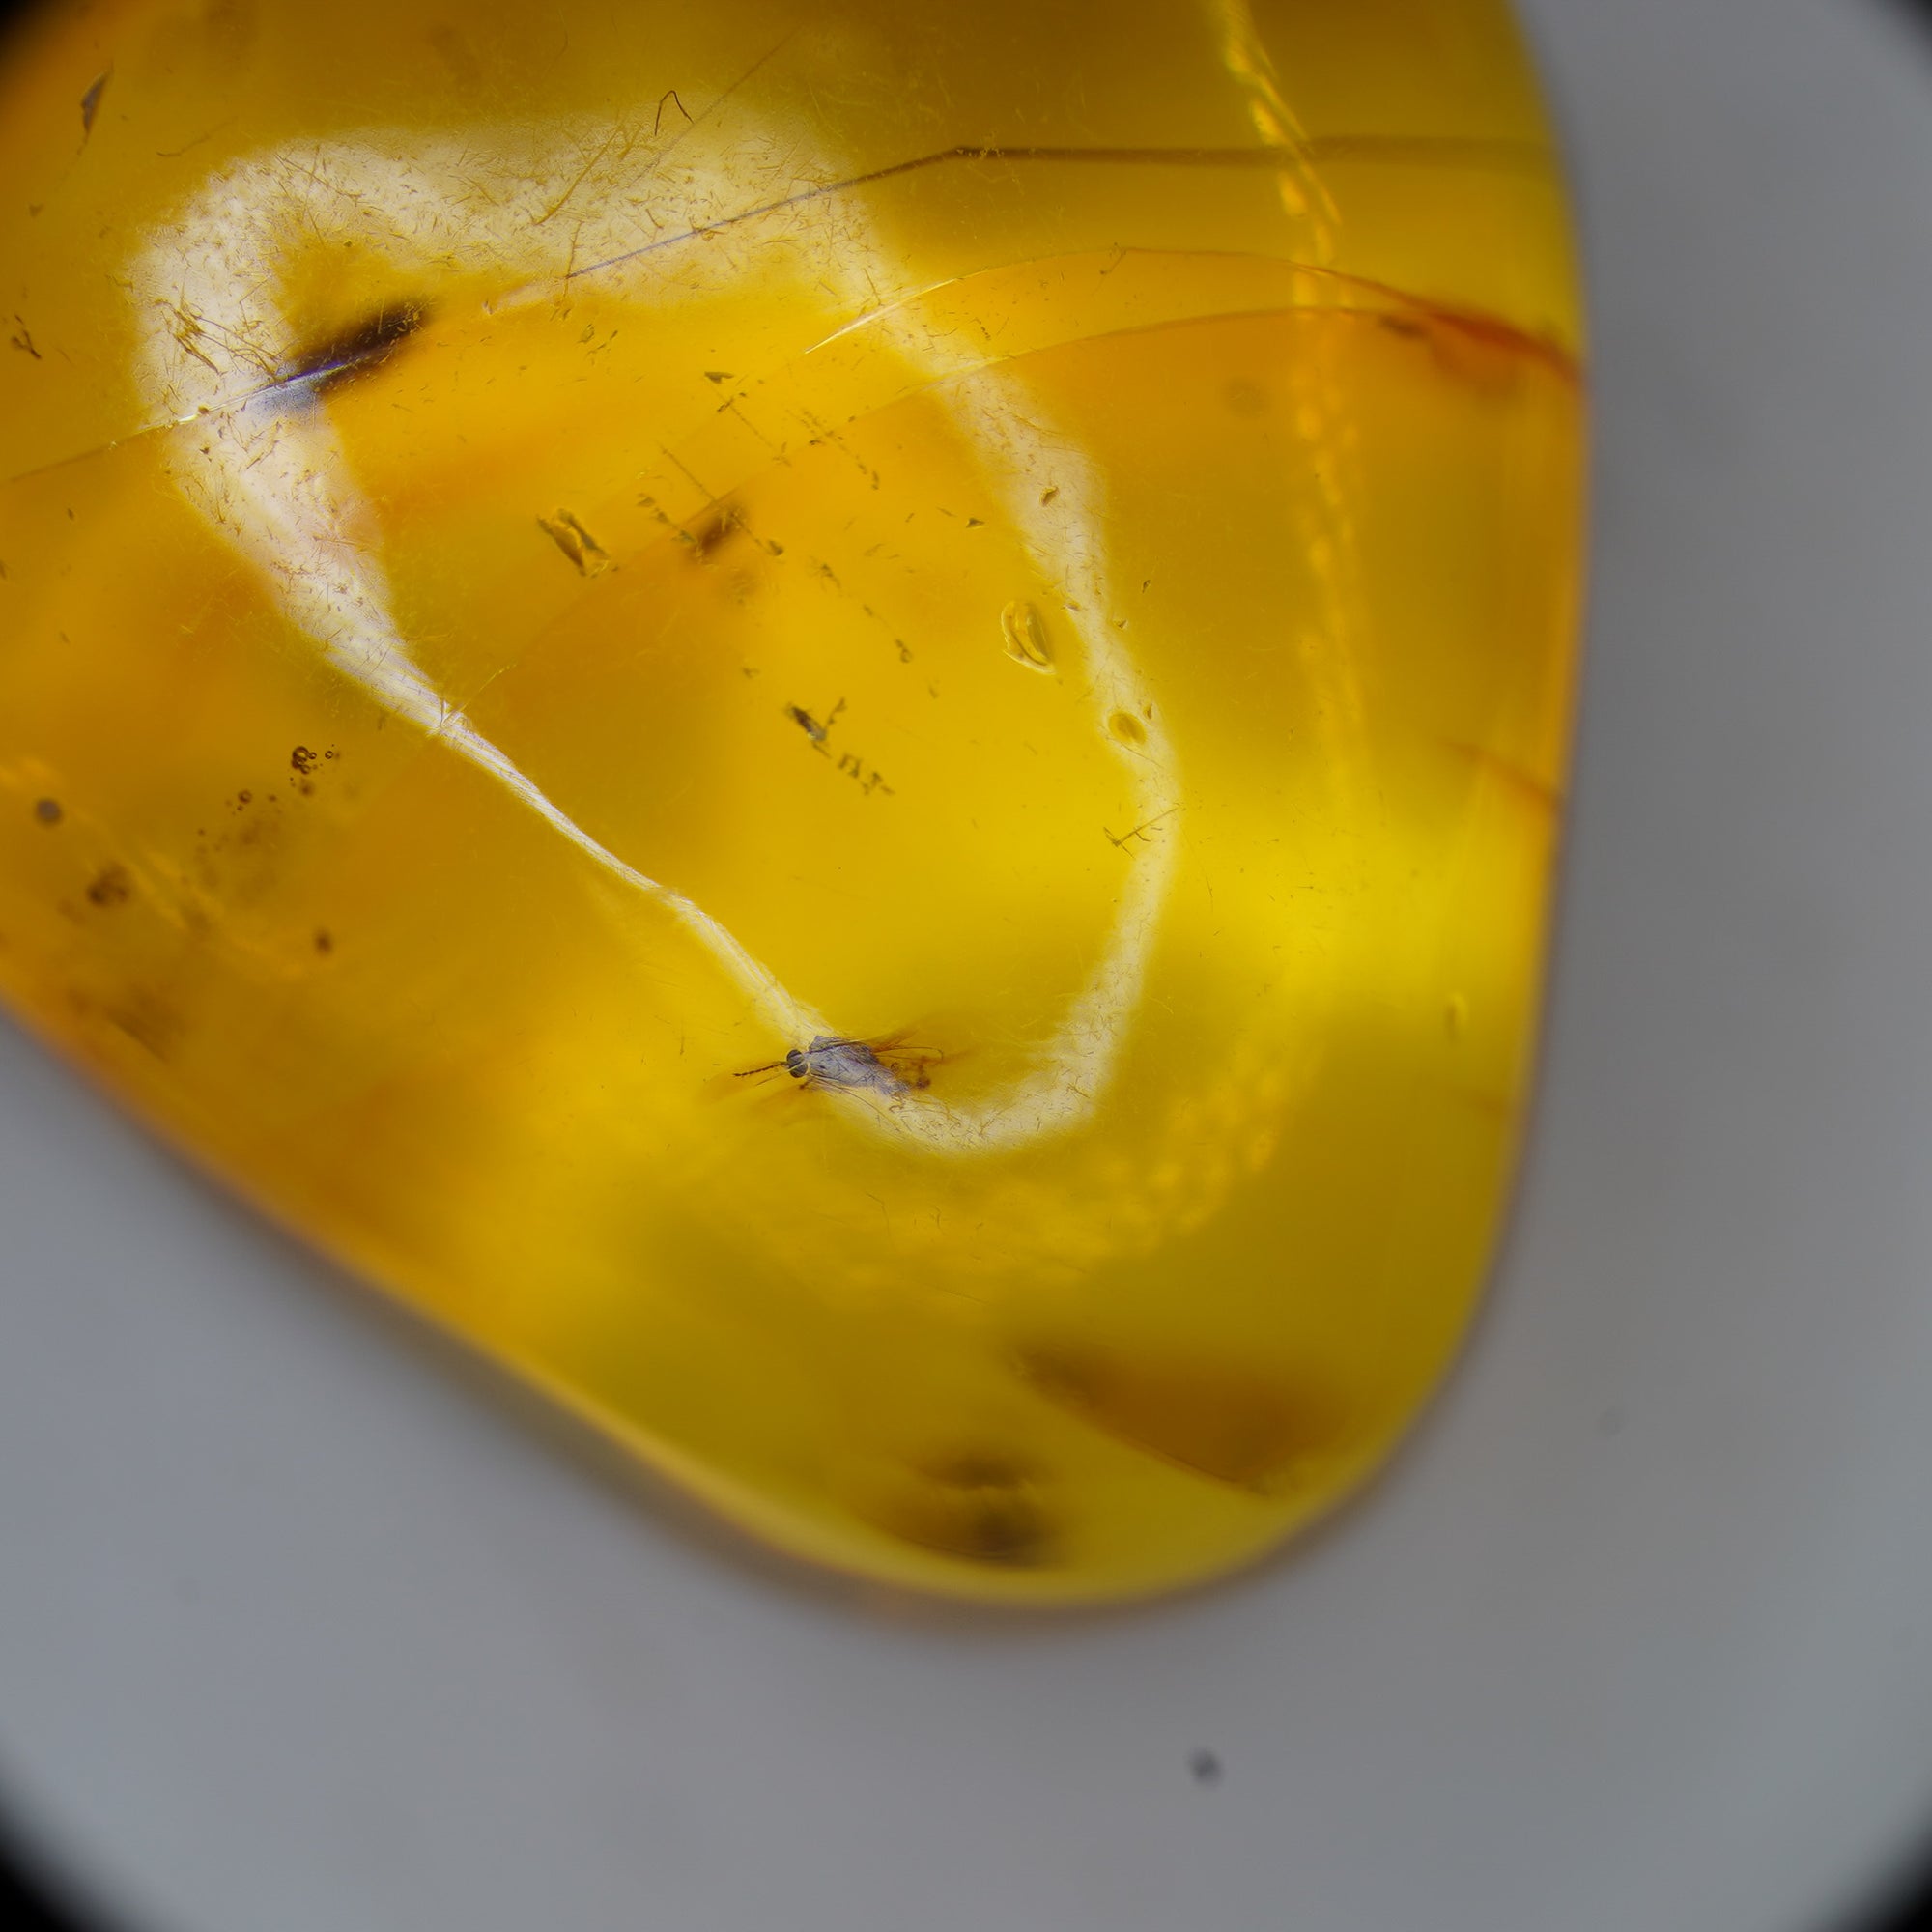 Mosquito with other insects in Dominican Amber -  Miocene Epoch - 15 to 20  MYA - Dominican Republic -23mm-